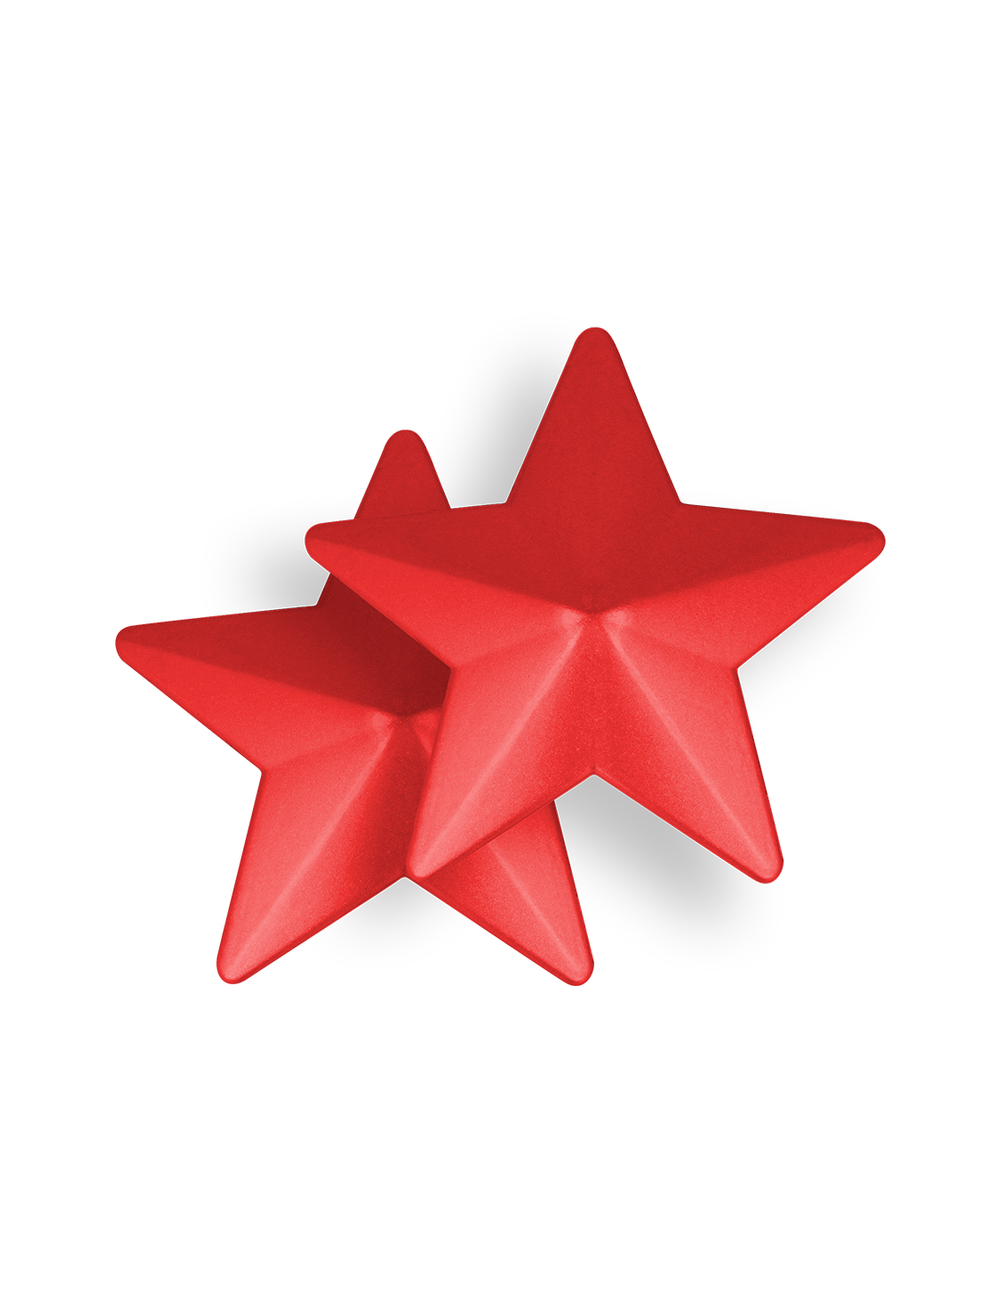 OHMAMA FETISH RED STAR NIPPLE COVERS